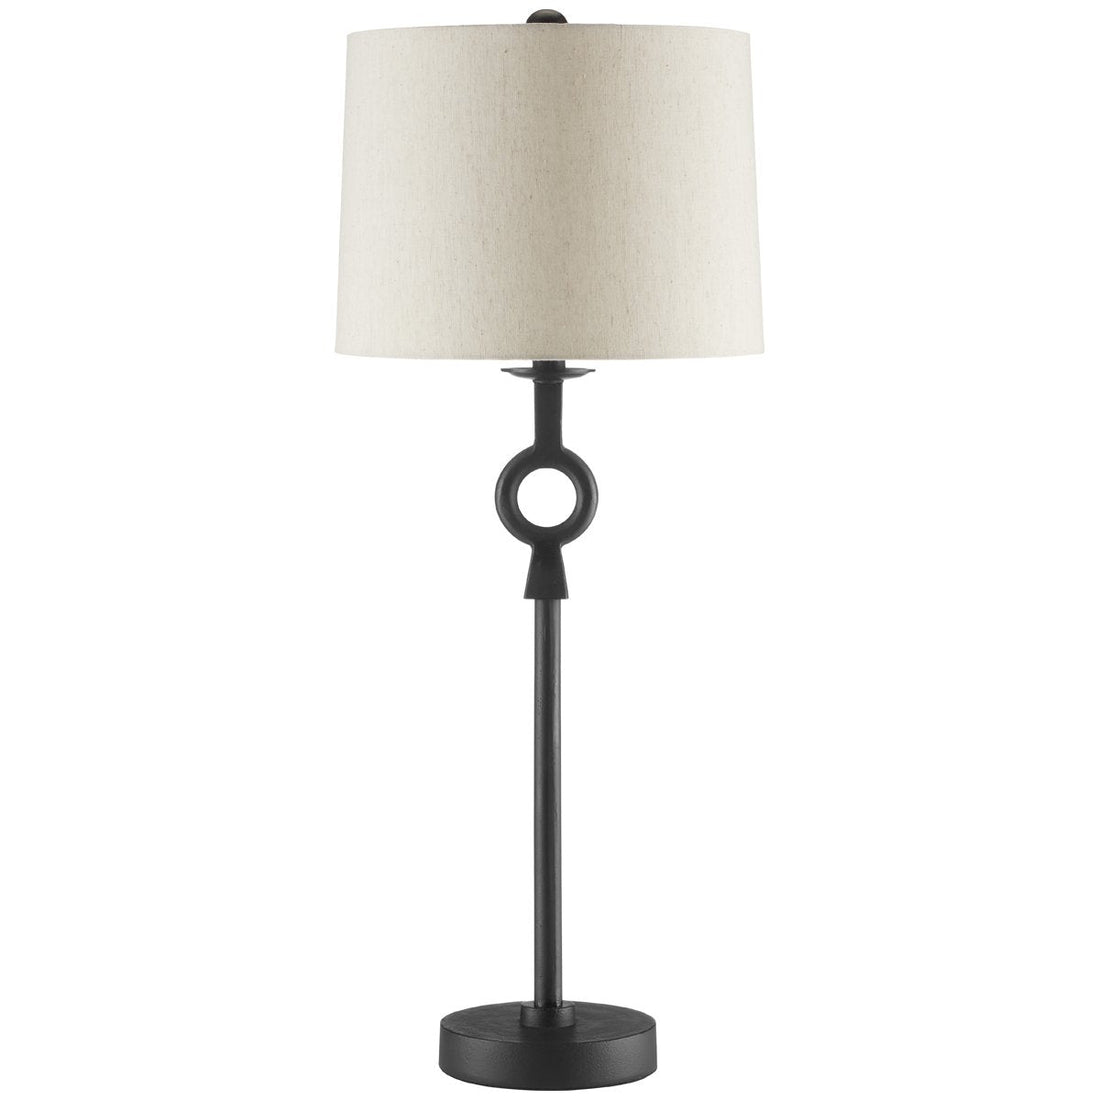 Currey and Company Germaine Table Lamp